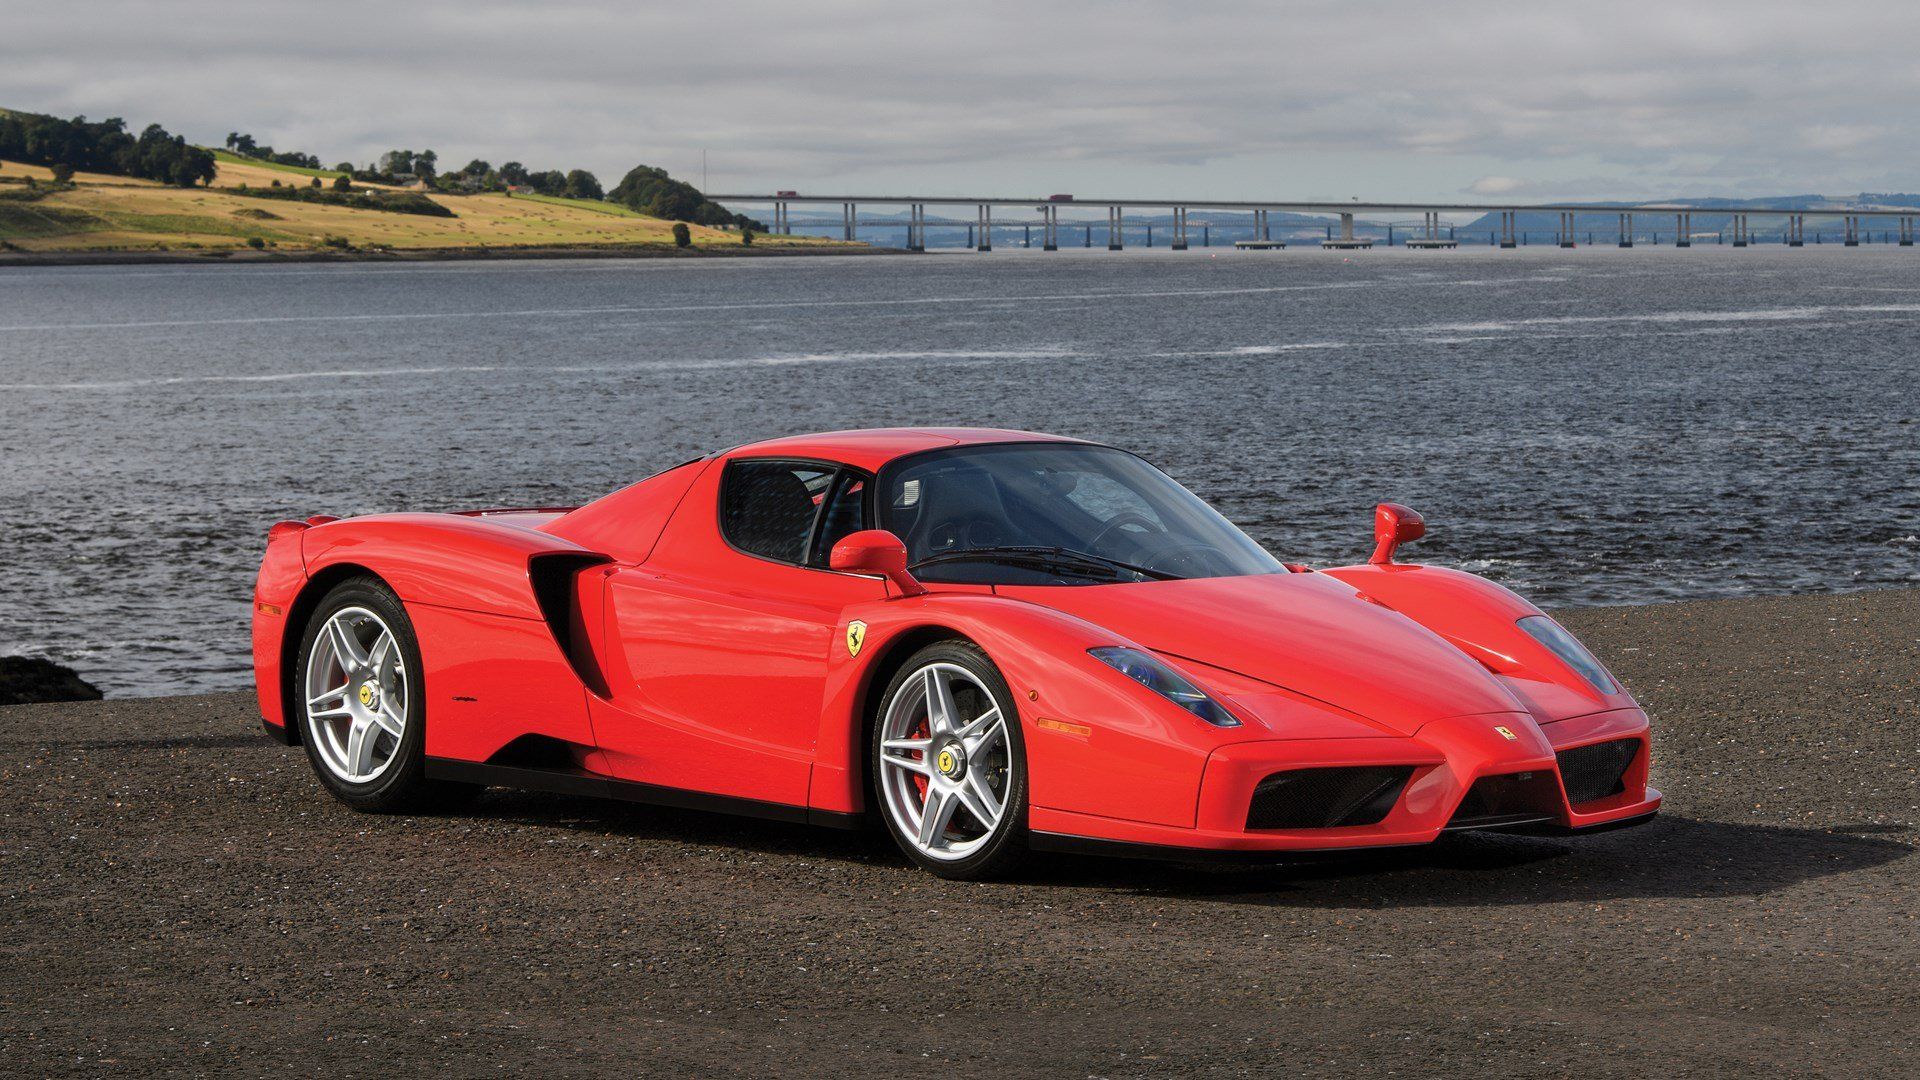 Red Enzo Ferrari parked on the tarmac next to a river